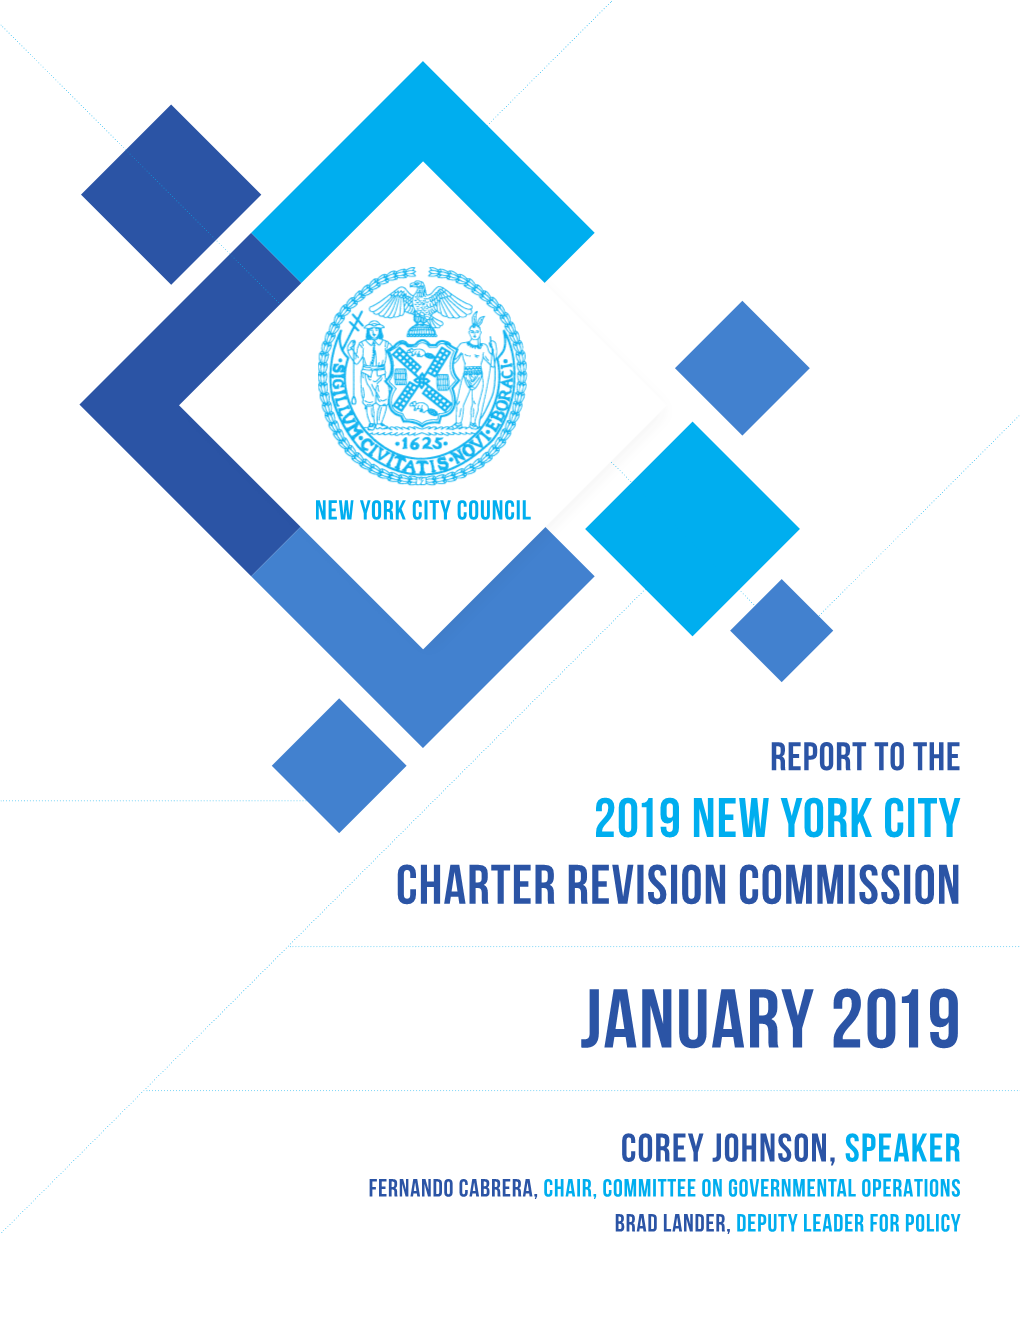 NYC Council Report to the 2019 Charter Revision Commission With